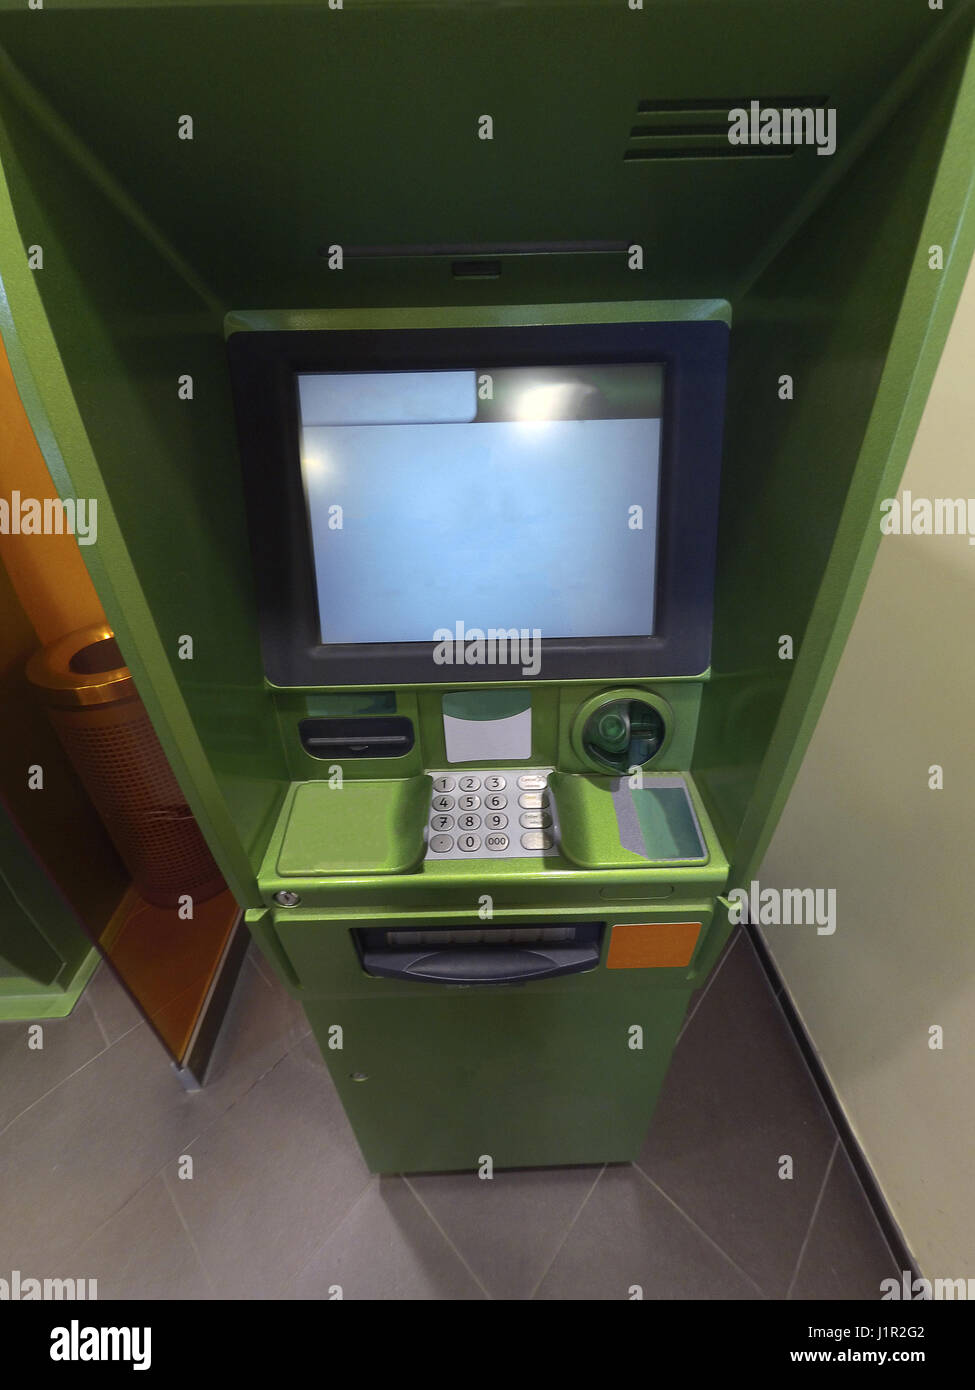 Cash dispenser for green money appearance from the top Stock Photo